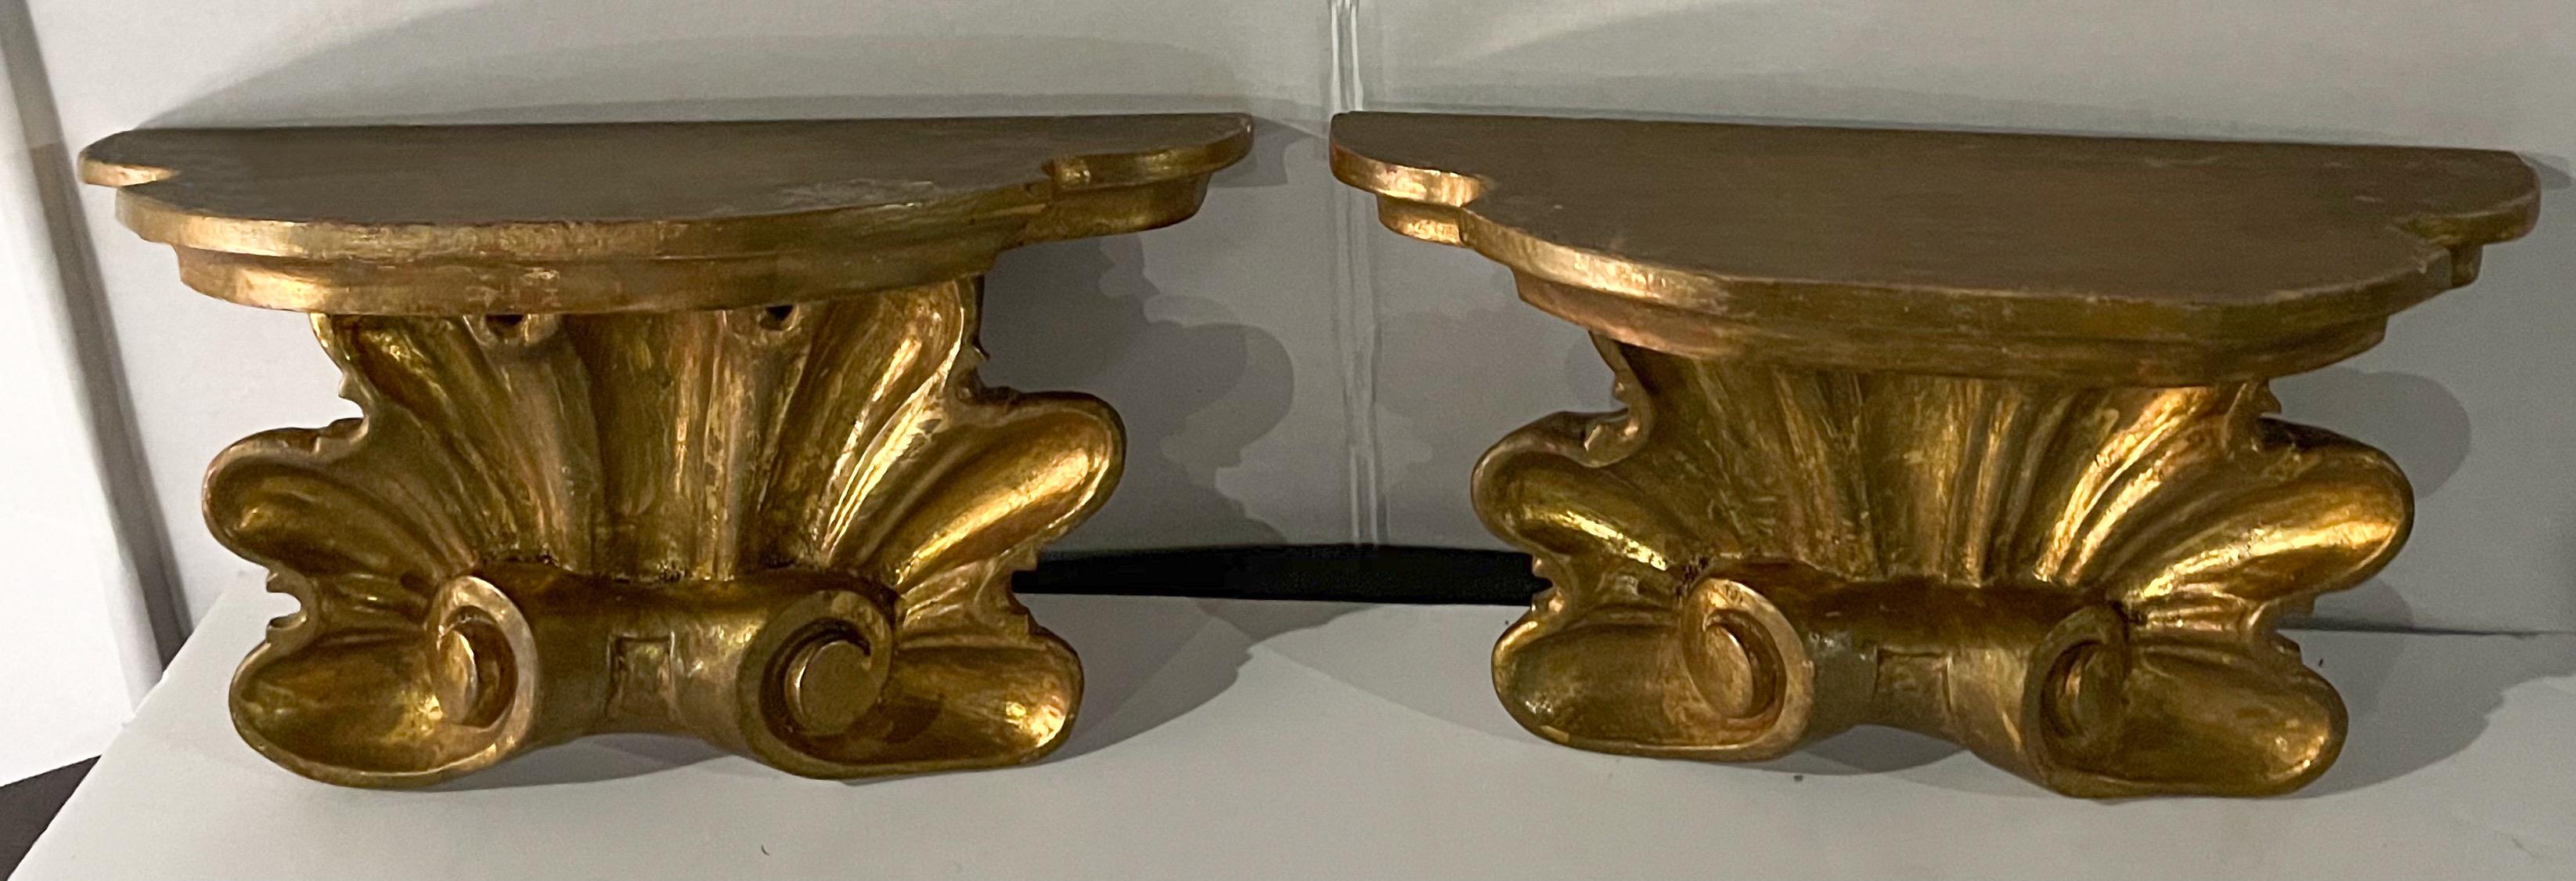 20th Century Early 20th-C. Italian Carved Giltwood Rococo Style Shell Form Brackets, Pair For Sale